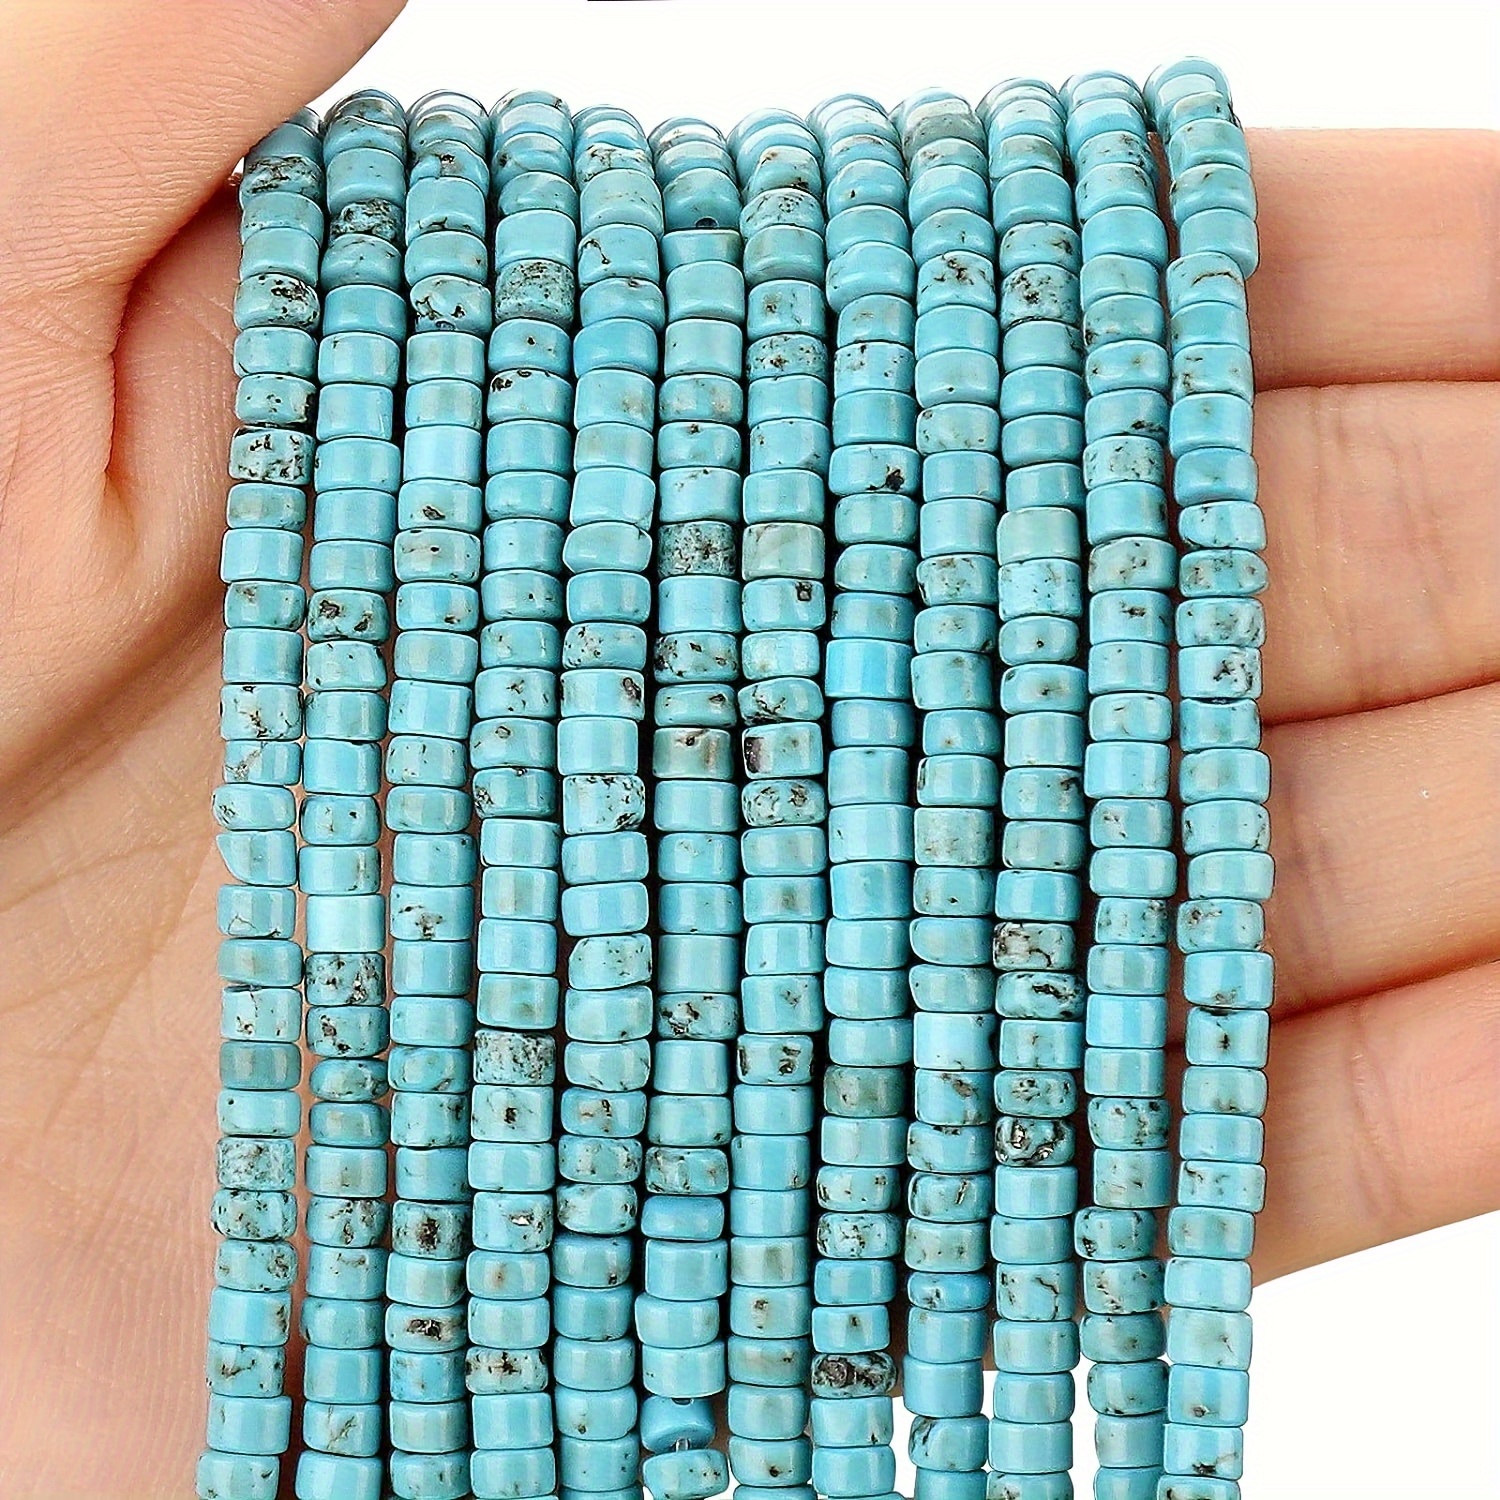 2MM Seed Beads For Jewelry Making 1000pcs Crystal Lampwork Glass Waist  Beads For Bracelets Bangles DIY Crafts Charms Accessories - Buy 2MM Seed  Beads For Jewelry Making 1000pcs Crystal Lampwork Glass Waist